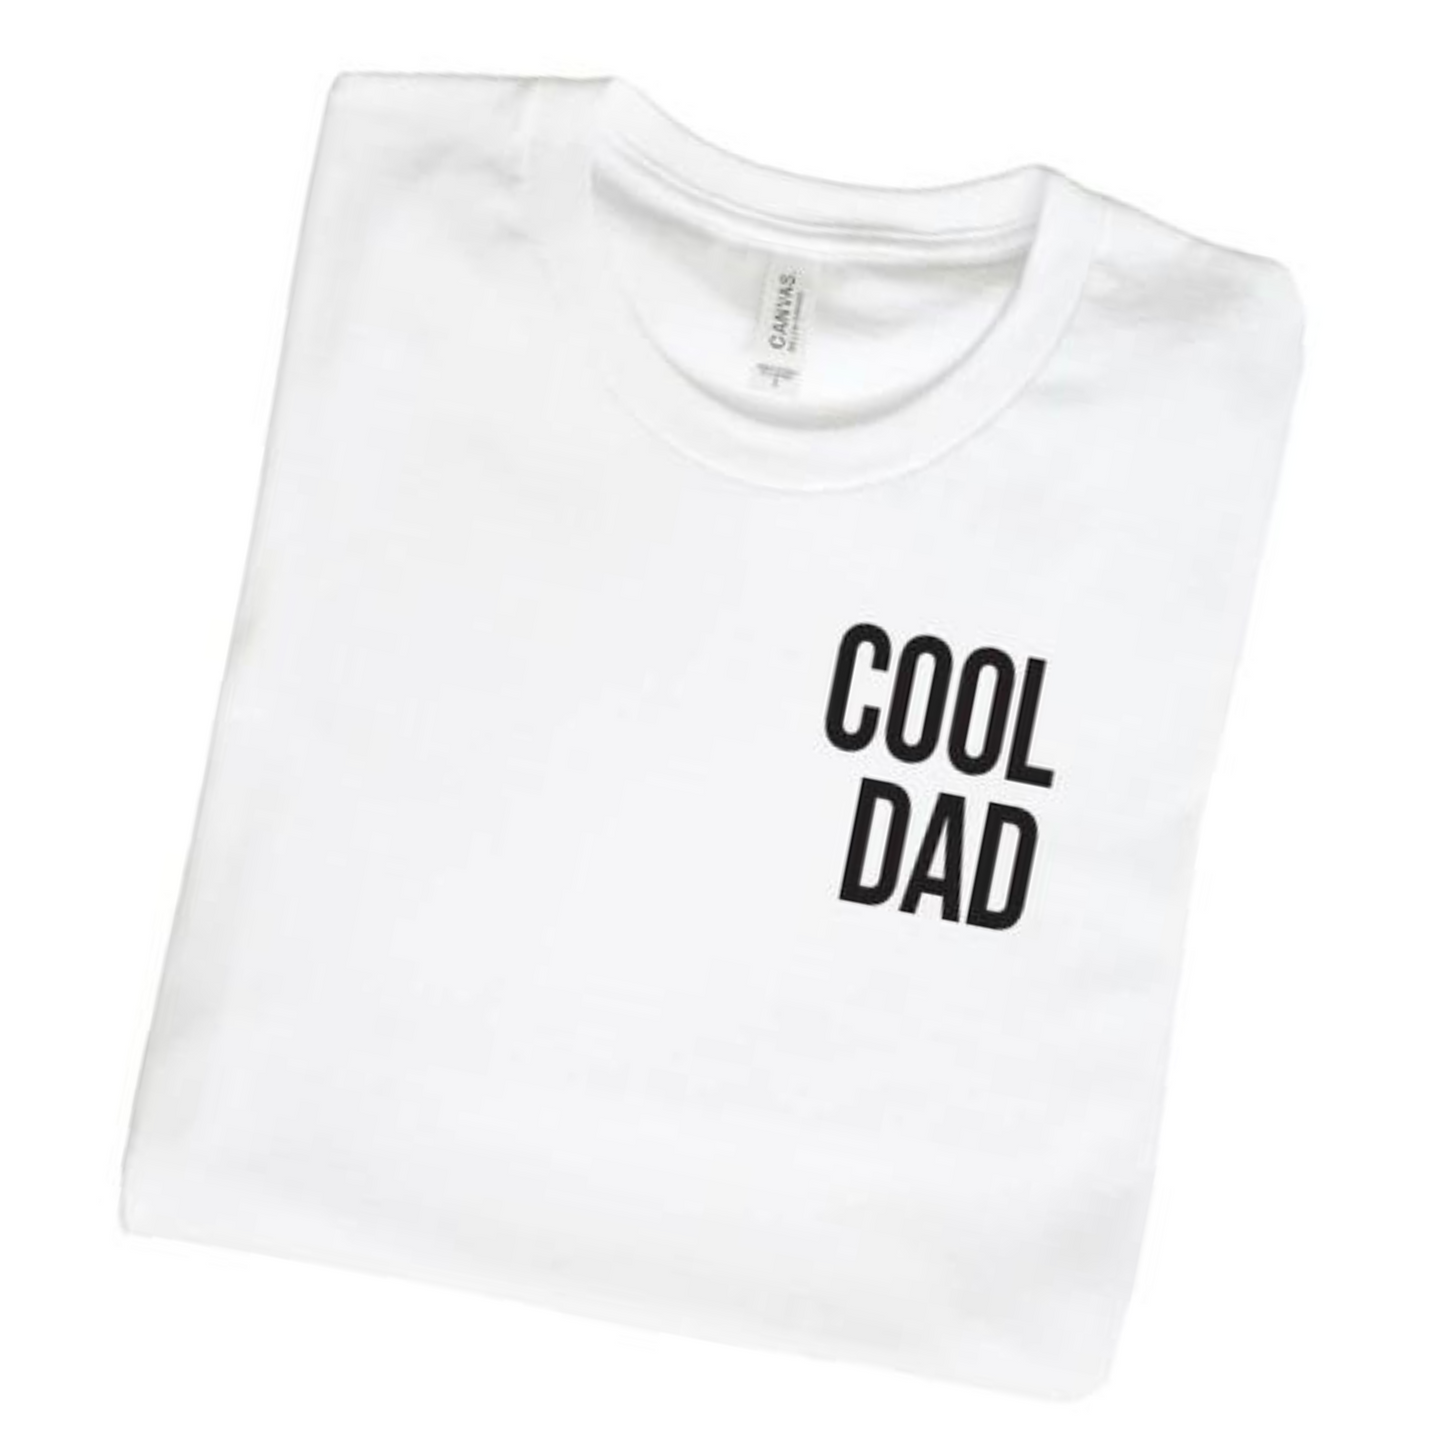 Cool Dad Pocket Style Graphic Tee, White